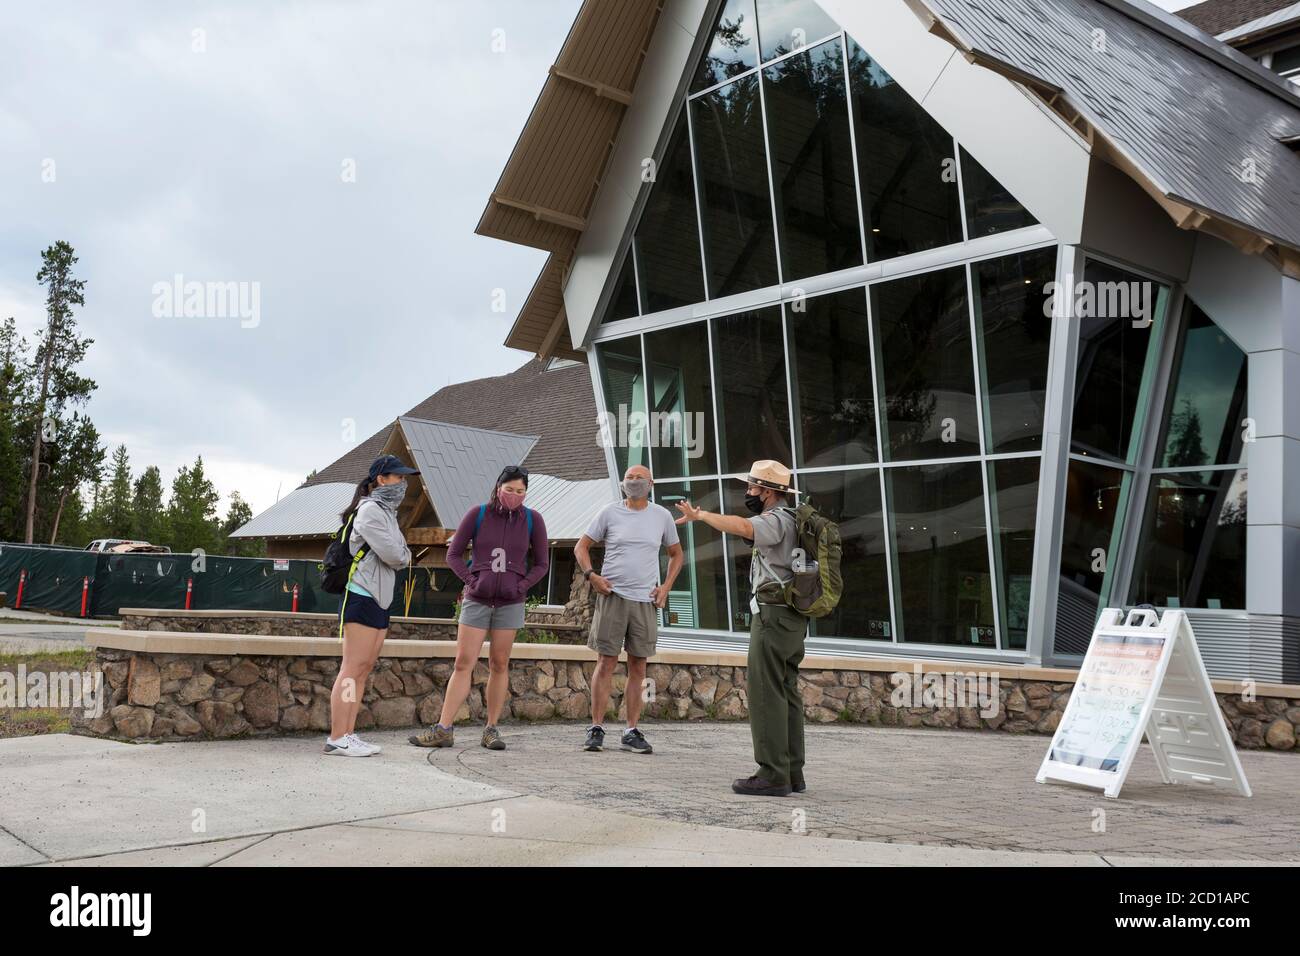 A National Park Ranger advises visitors outside the closed The Old Faithful Visitor Education Center in Yellowstone National Park, Wyoming on Monday, Stock Photo